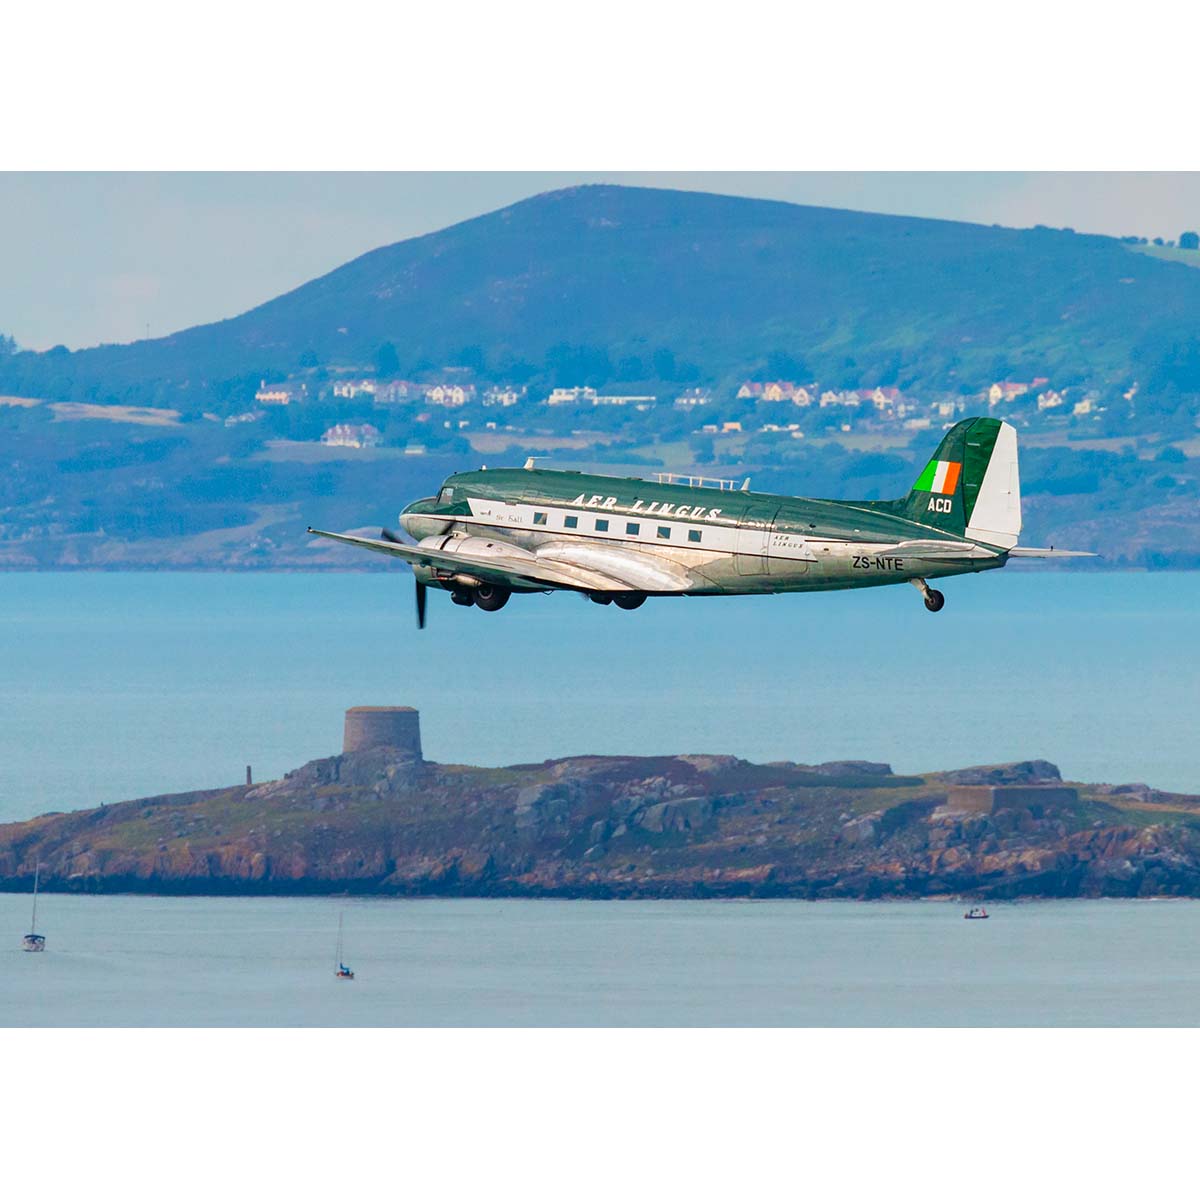 Douglas DC3 in Aer Lingus livery over Dalkey Island